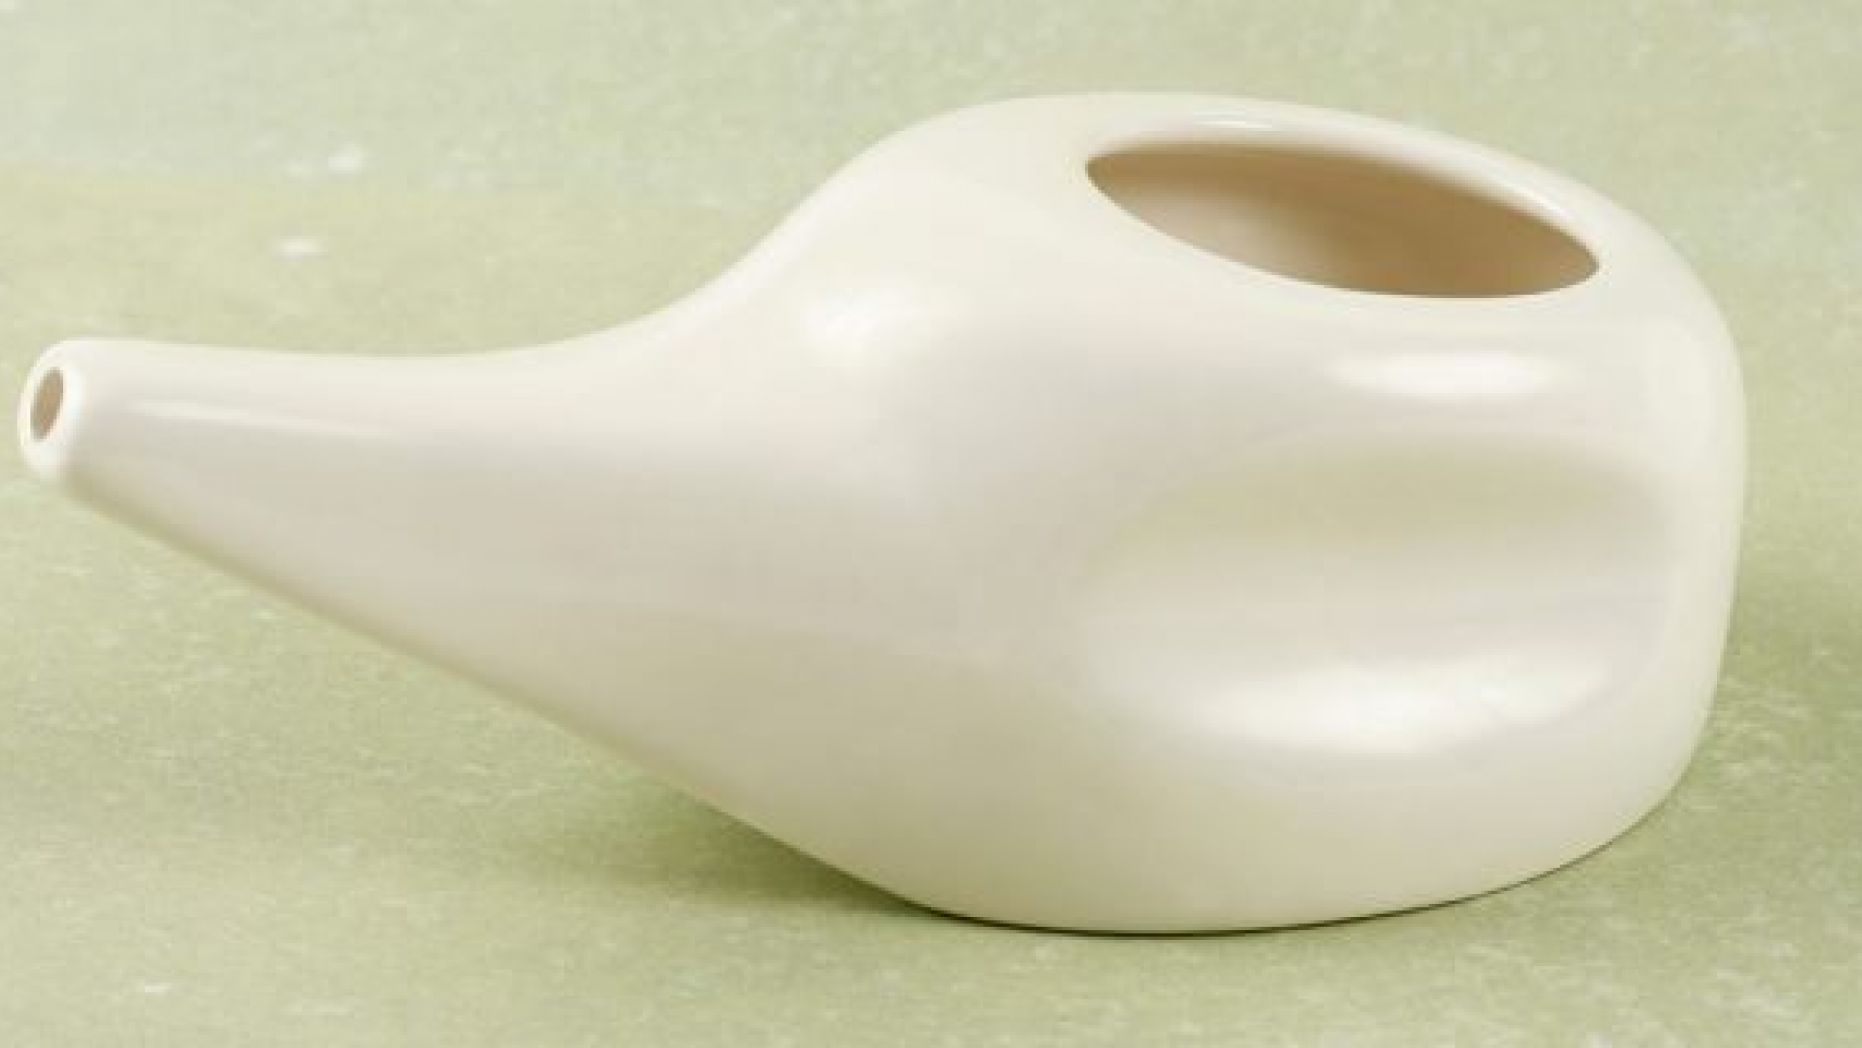 The woman filled the neti pot with tap water, doctors said.